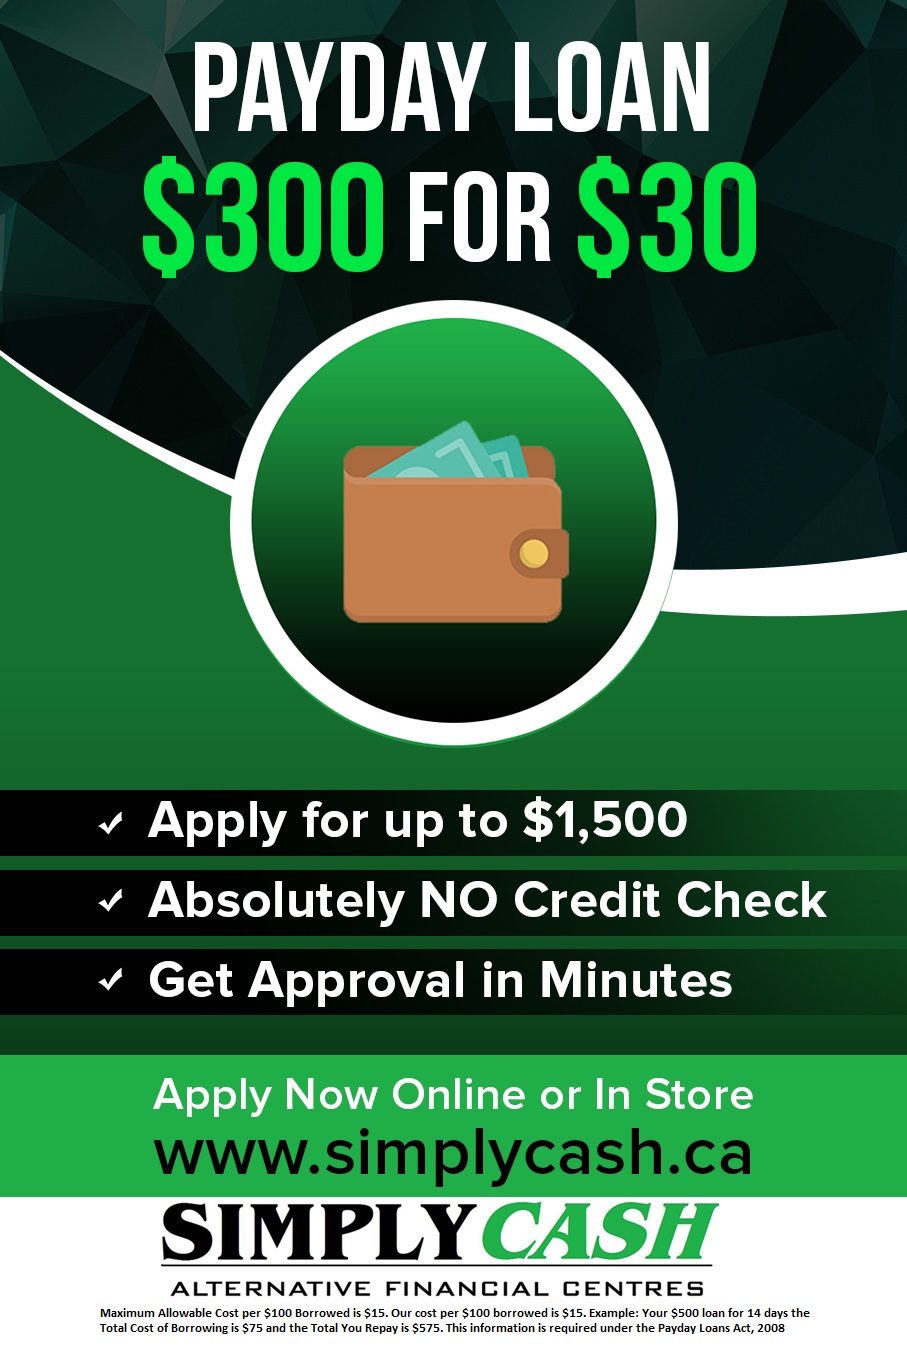 Payday loans bad credit Ontario| cash advance payday loans|Simplycash